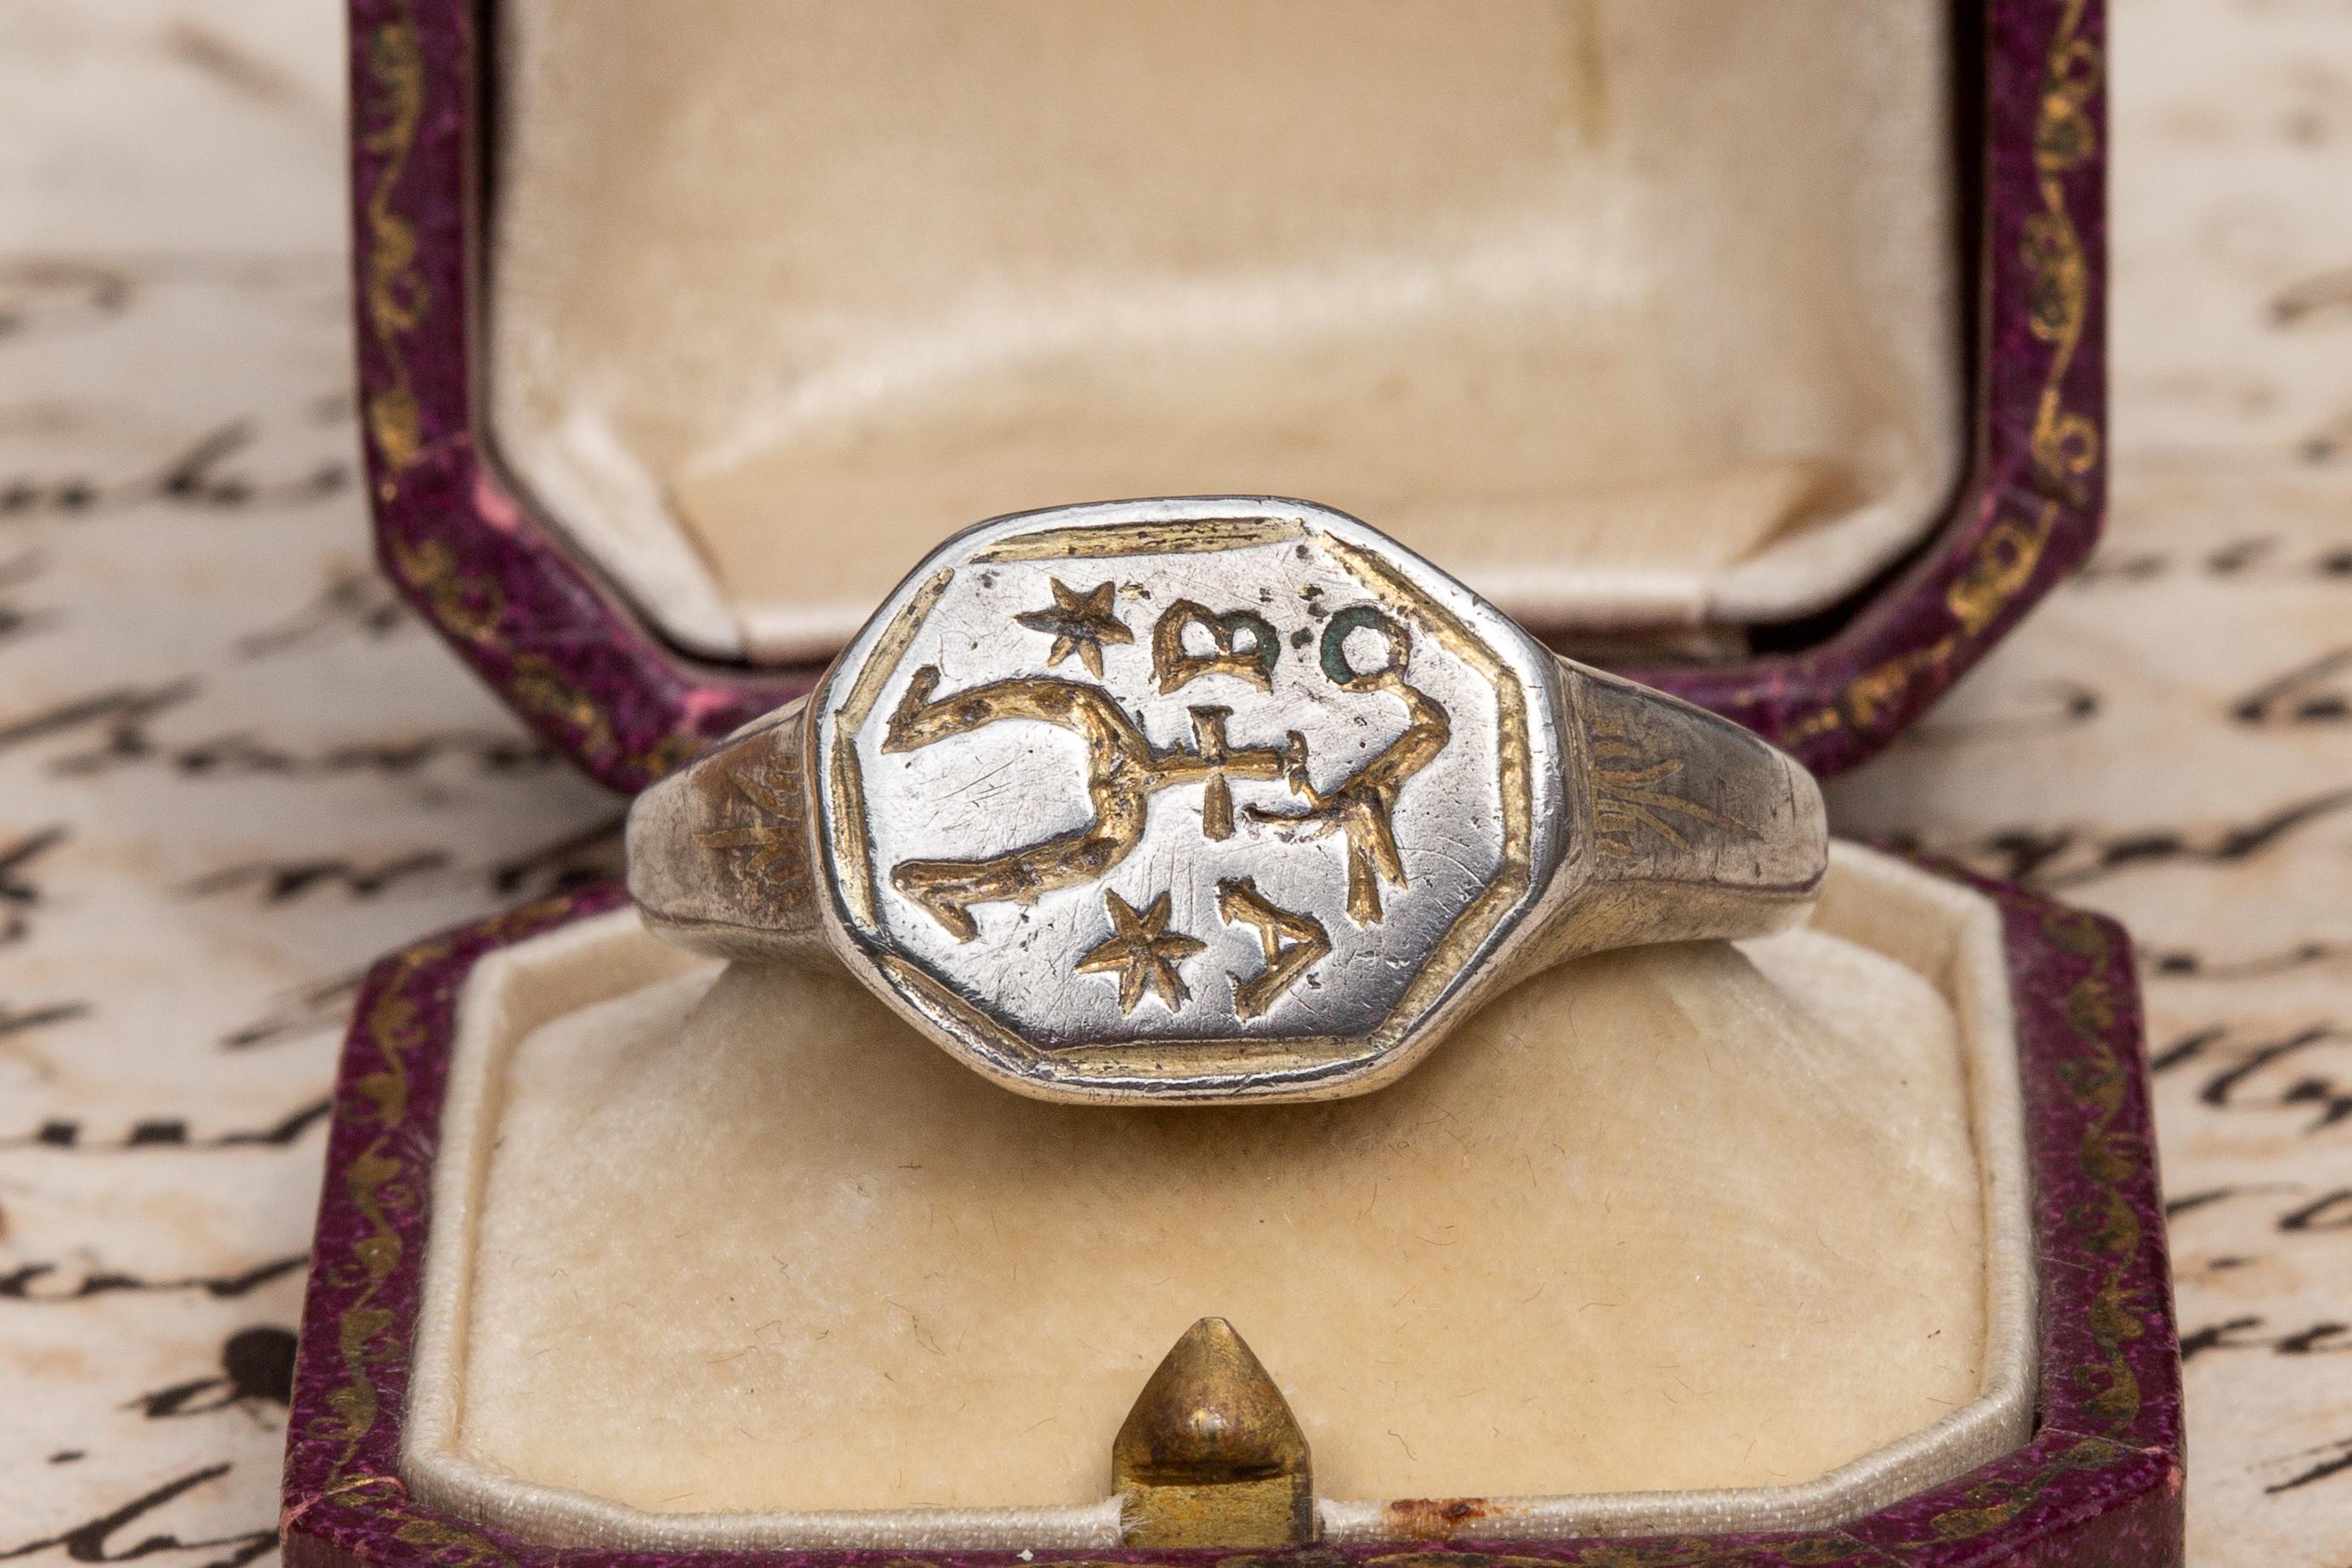 This rare heraldic silver intaglio signet ring dates from the 16th century and originates from Poland. The octagonal bezel is engraved with a Polish noble (szlachta) coat of arms known as 